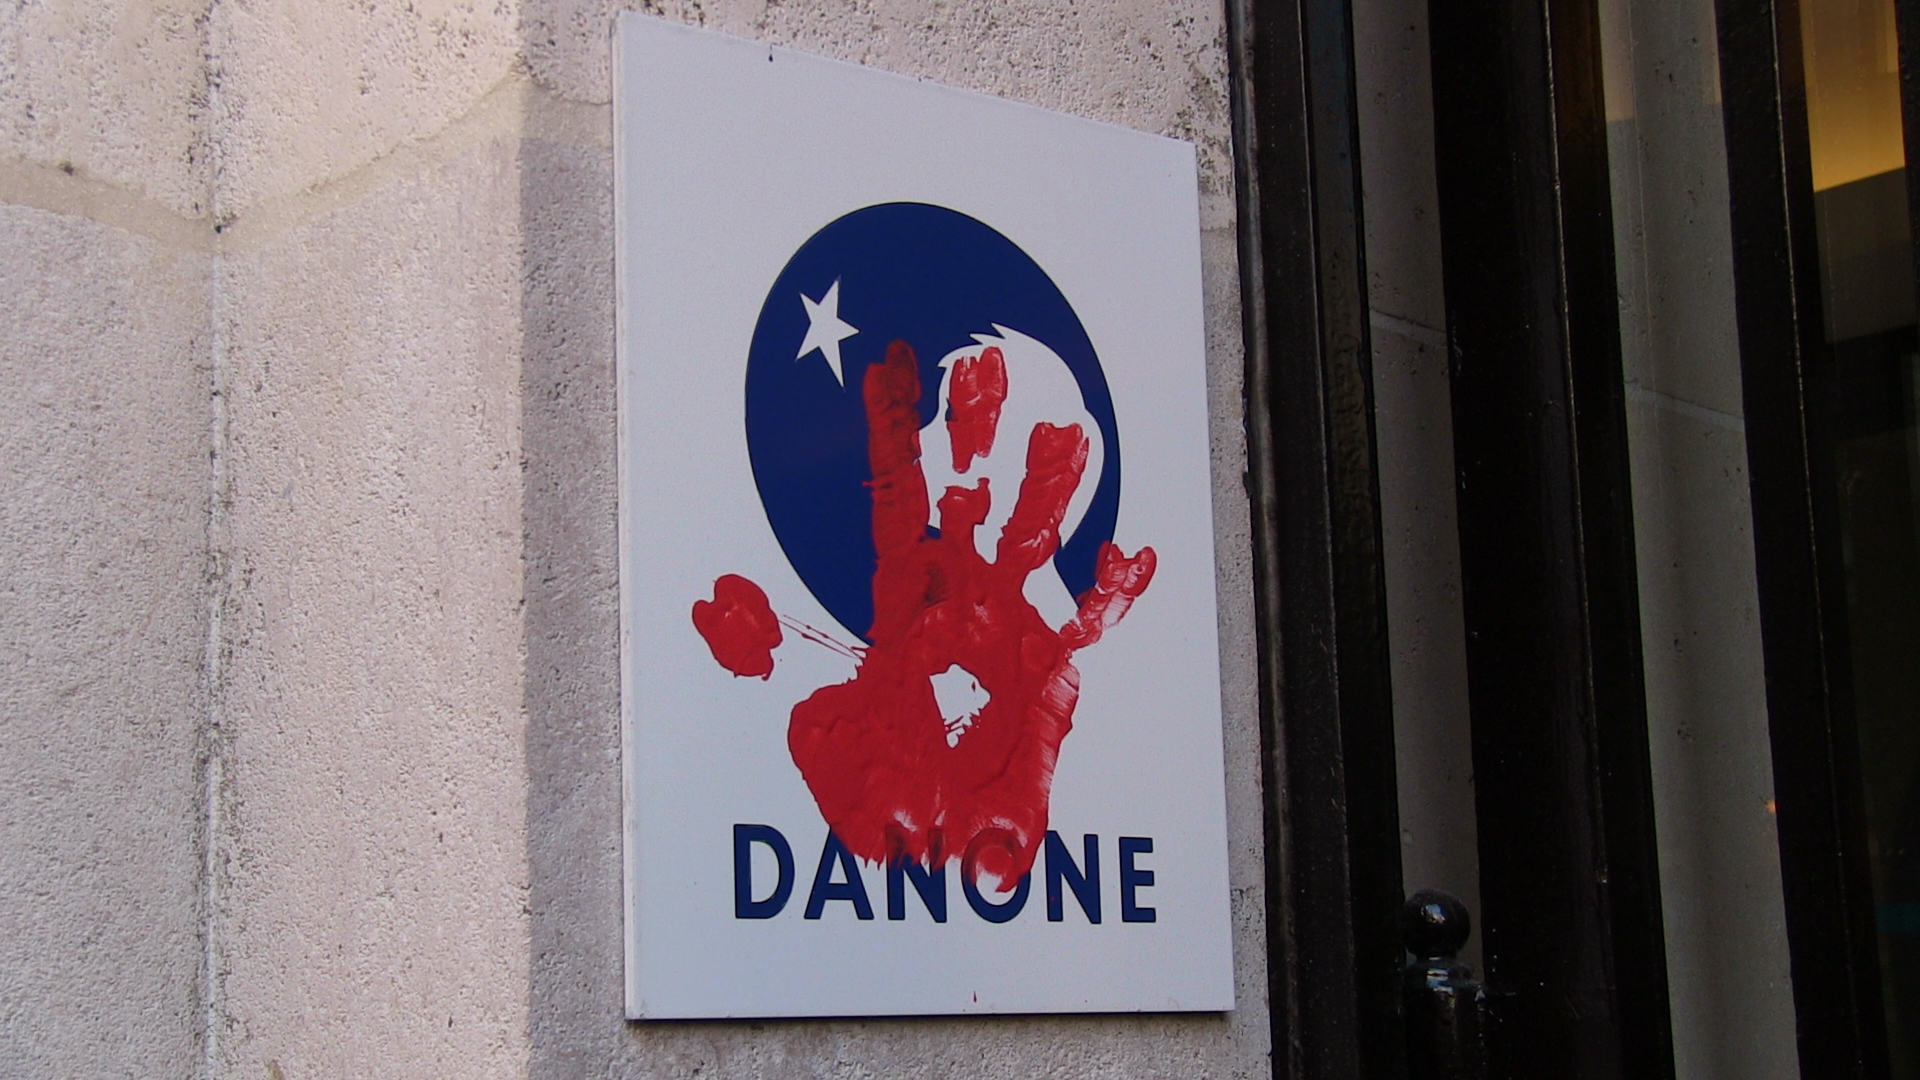 Via Campesina protesters put their red hand print on Danone's logo expressing their demand that the company stop affecting campesinos worldwide.